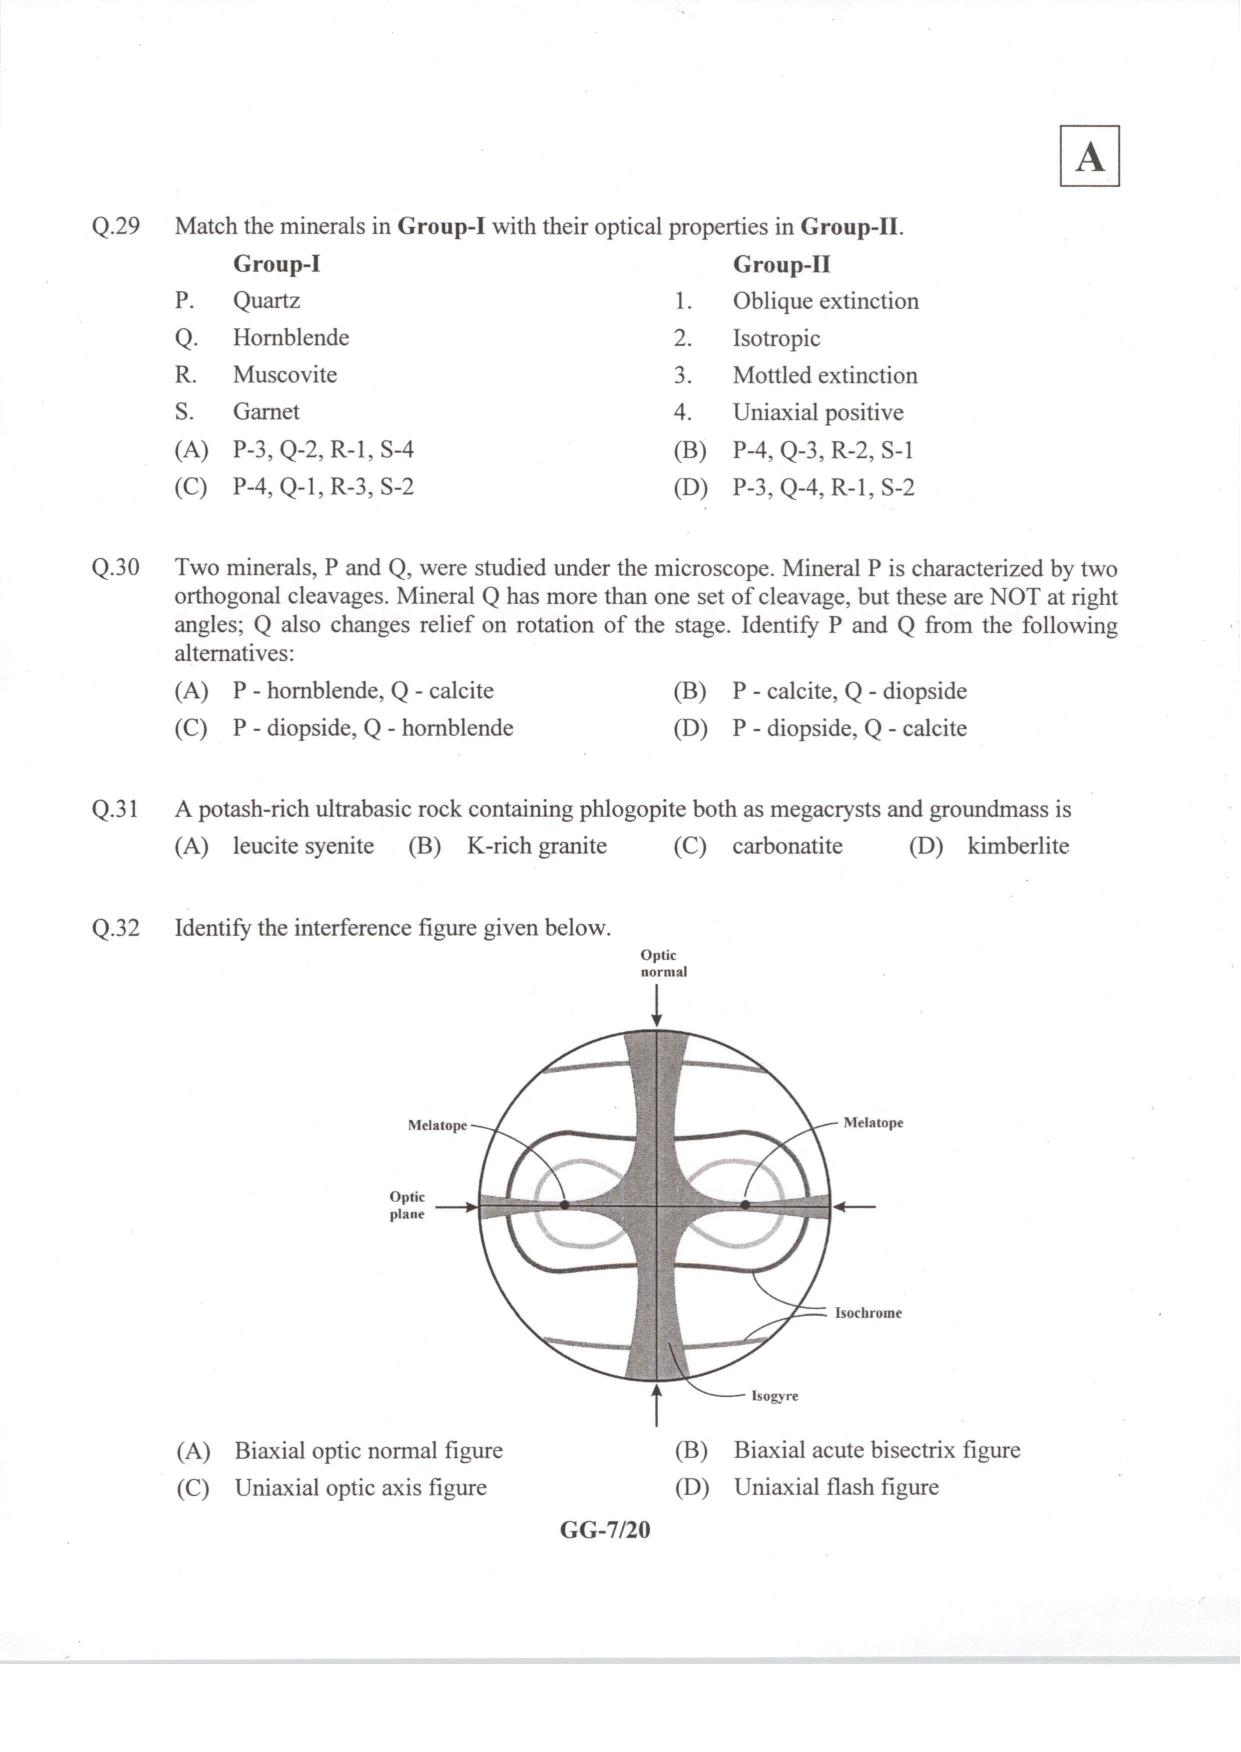 JAM 2014: GG Question Paper - Page 9